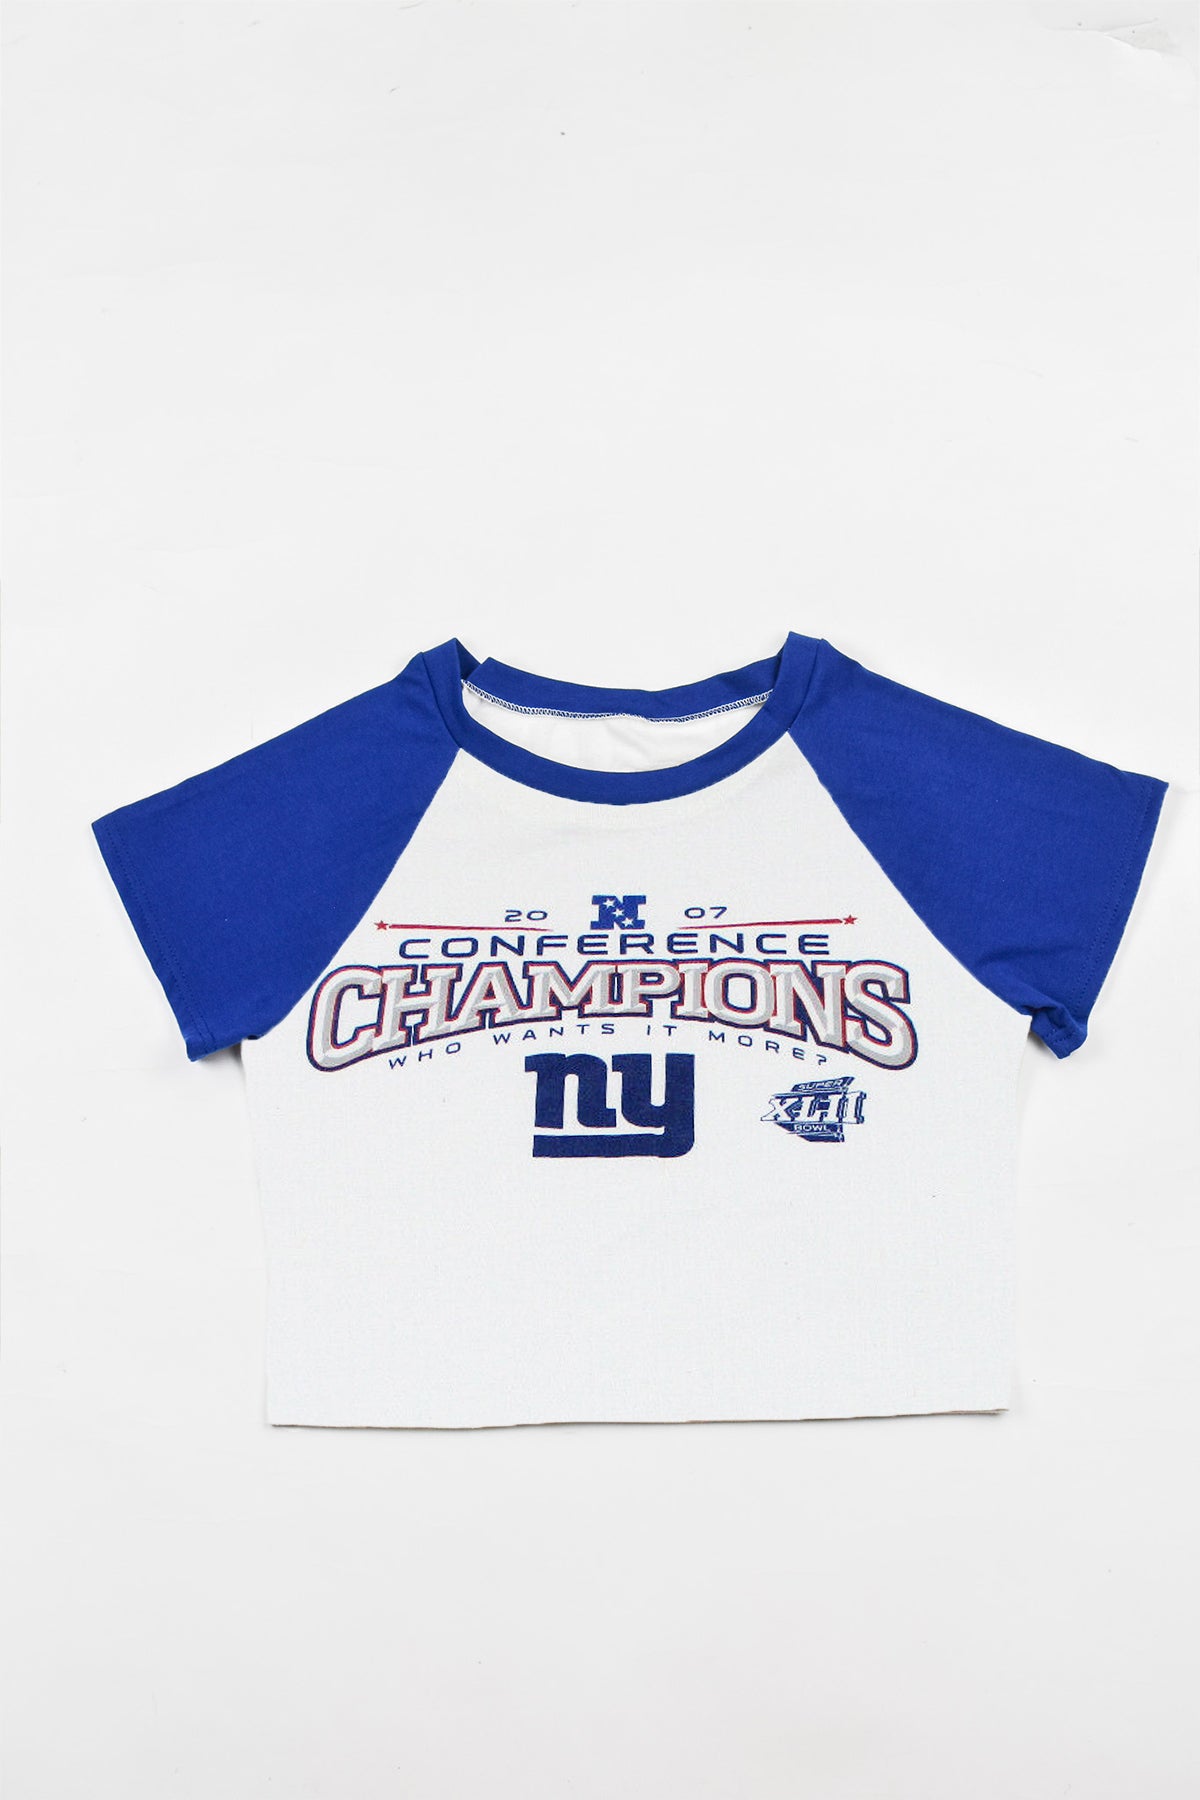 Upcycled Giants Baby Tee *MADE TO ORDER*